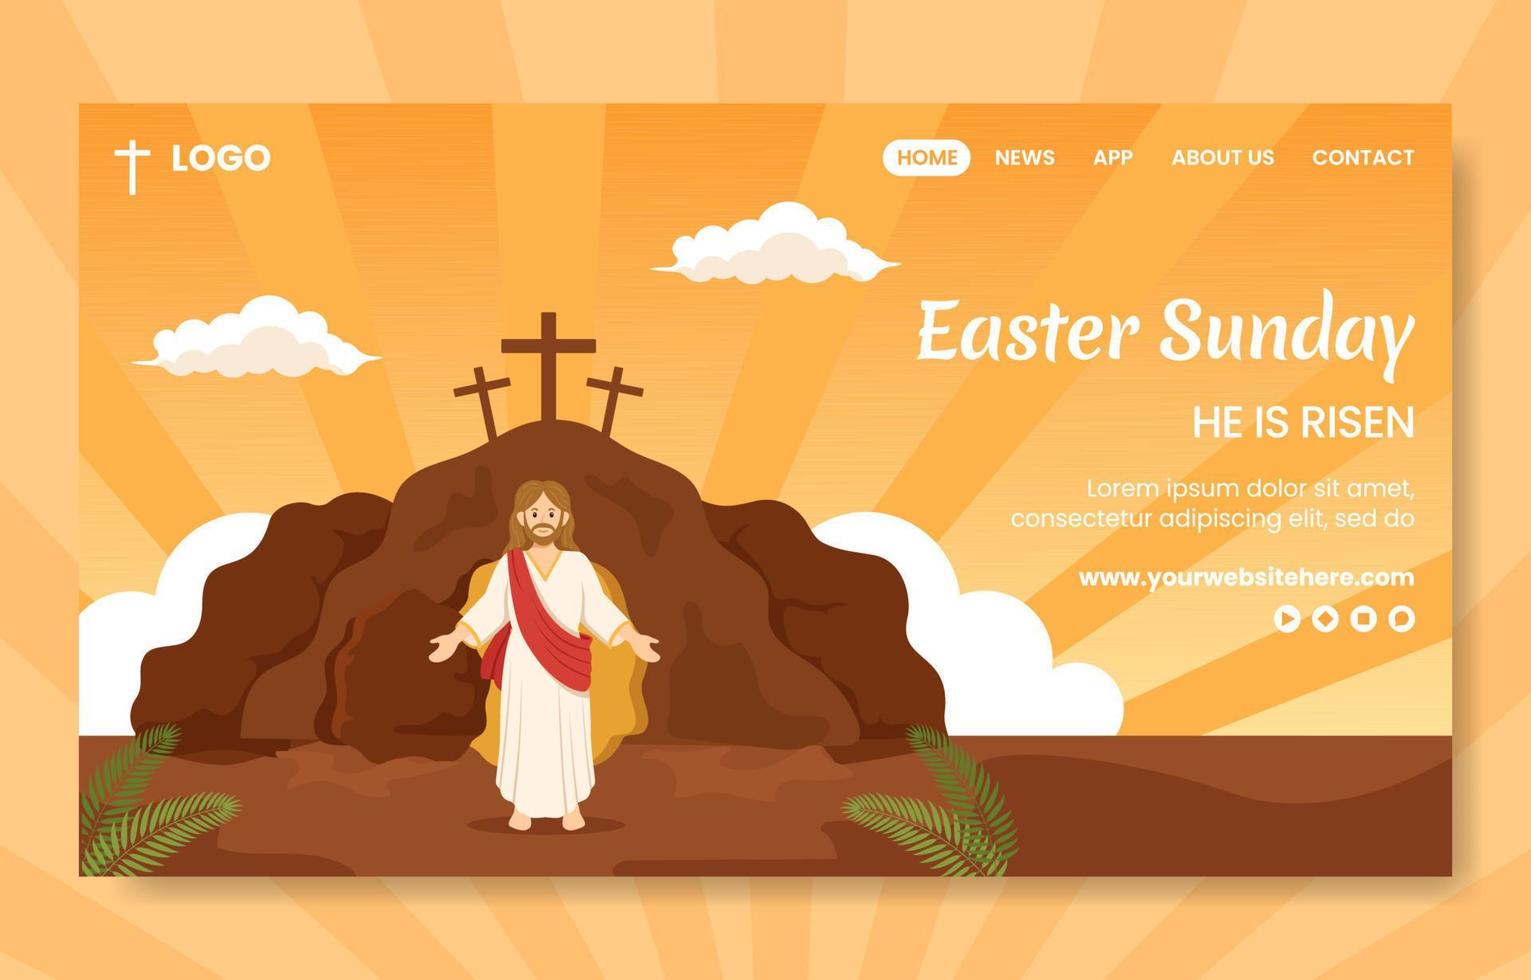 Happy Easter Sunday Day Social Media Landing Page Hand Drawn Template Background Illustration vector